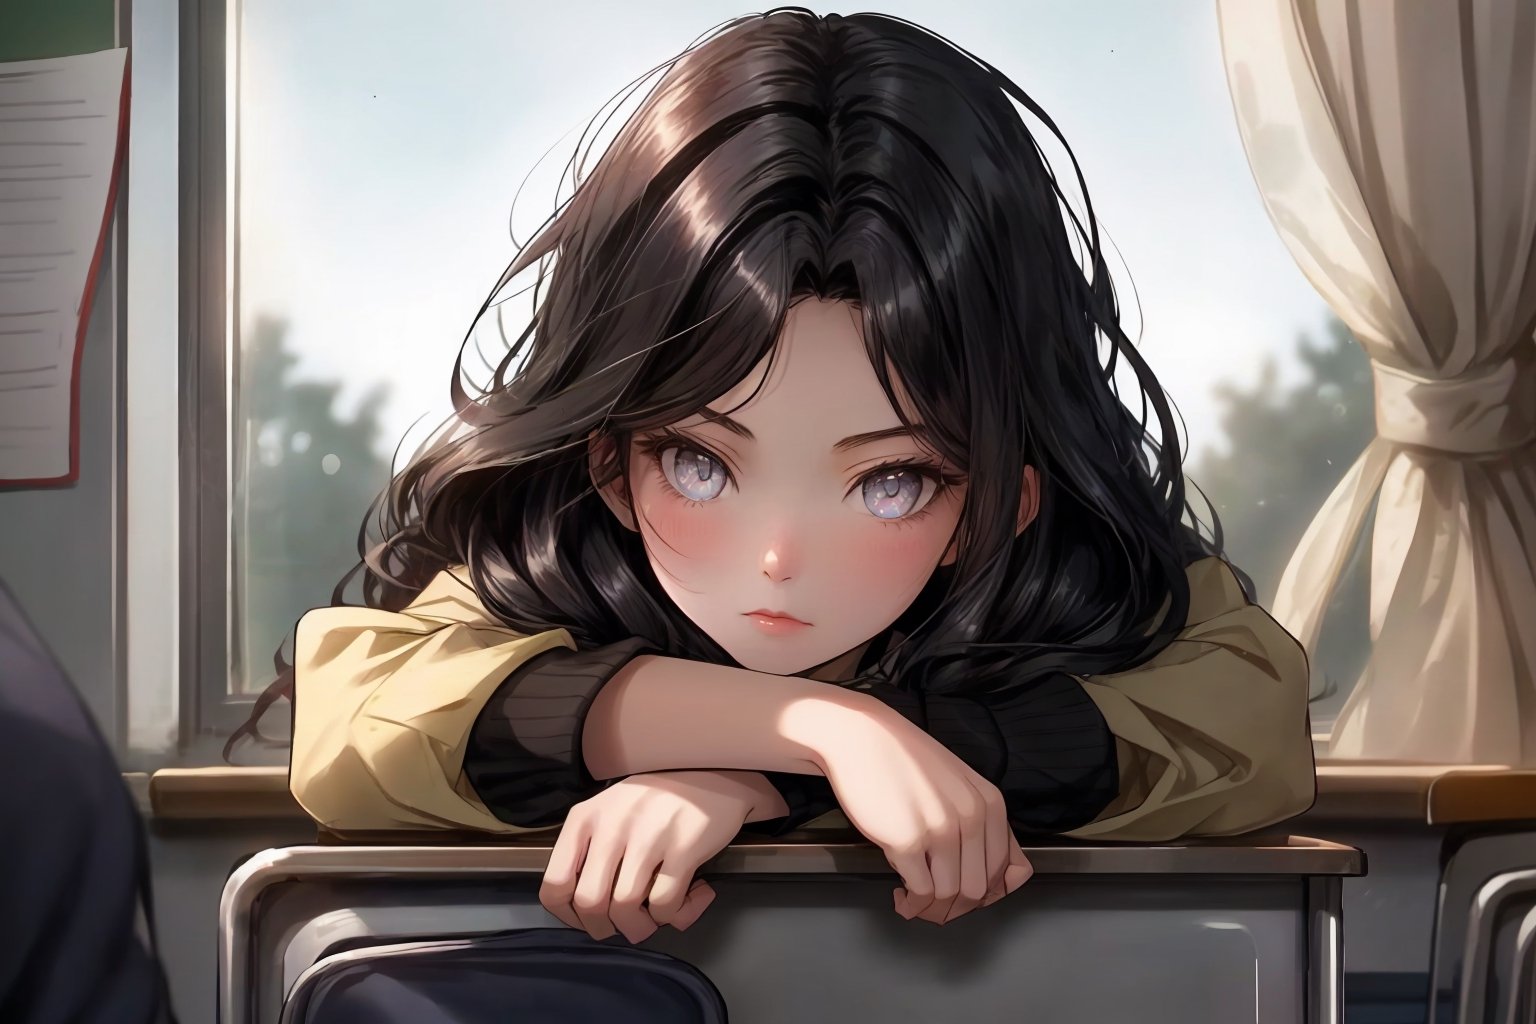 She was sitting in the back of the class, her long dark hair cascading over her shoulders, her dark eyes staring out the window. in a high school classroom.